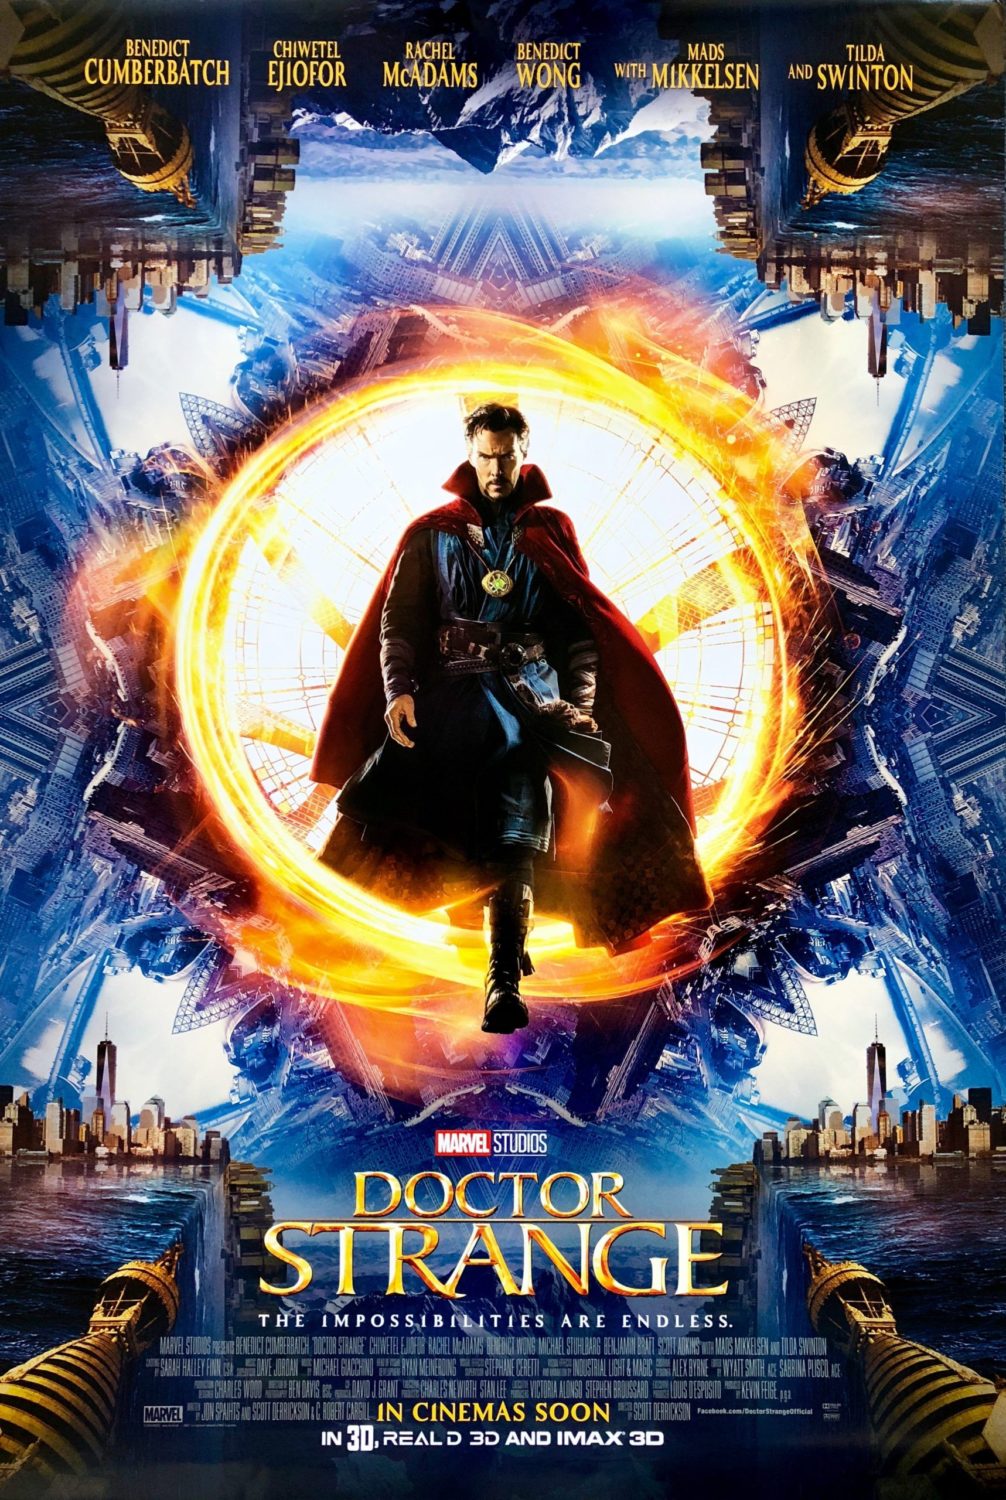 Doctor Strange poster from successful Lost Boys School of VFX alumni film credits for Visual Effects.